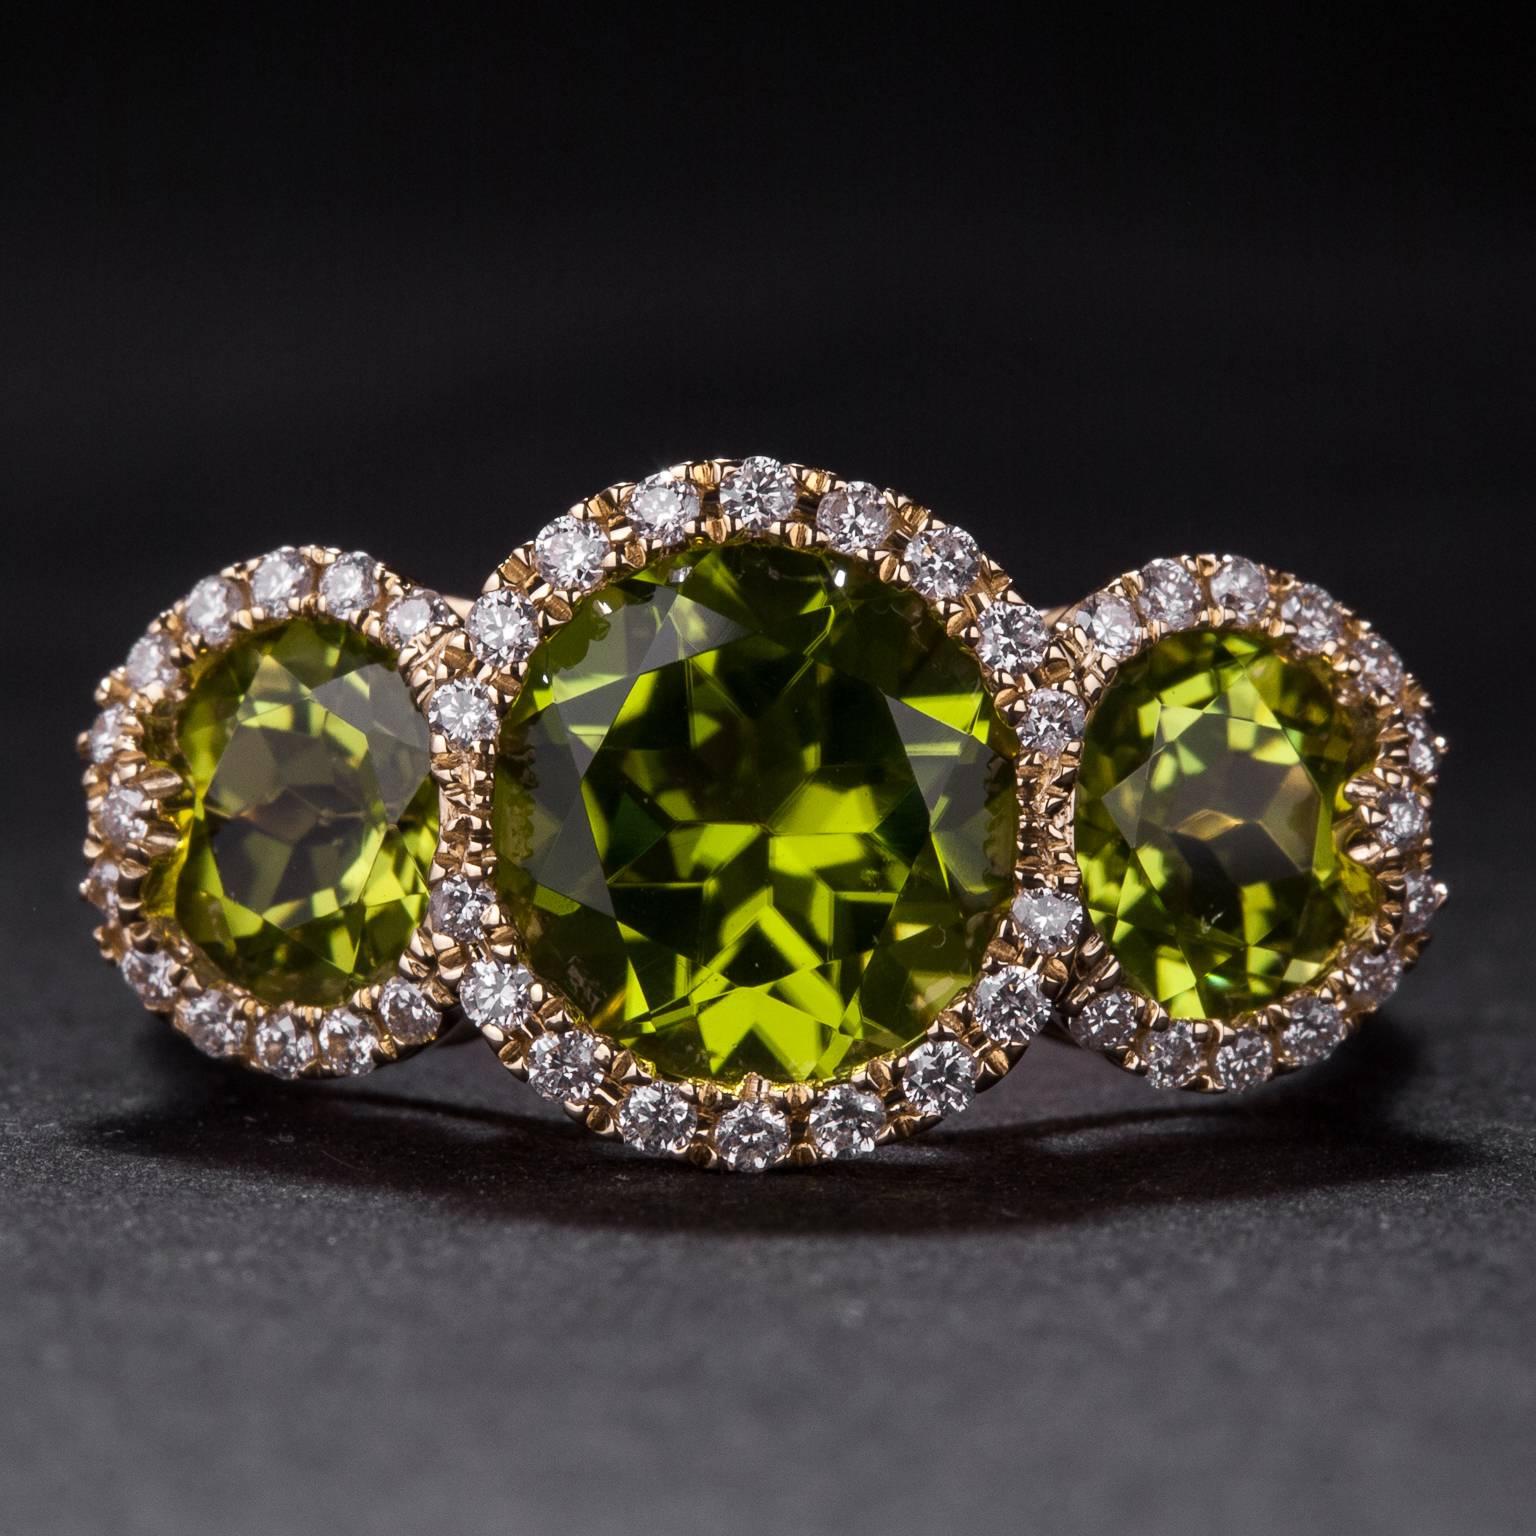 This stunning ring features 3 peridot for a total of 4.20 carats as well as .25 total carats of diamonds. It is crafted in 18k yellow gold and is currently size 7.

This ring may be sized to fit.